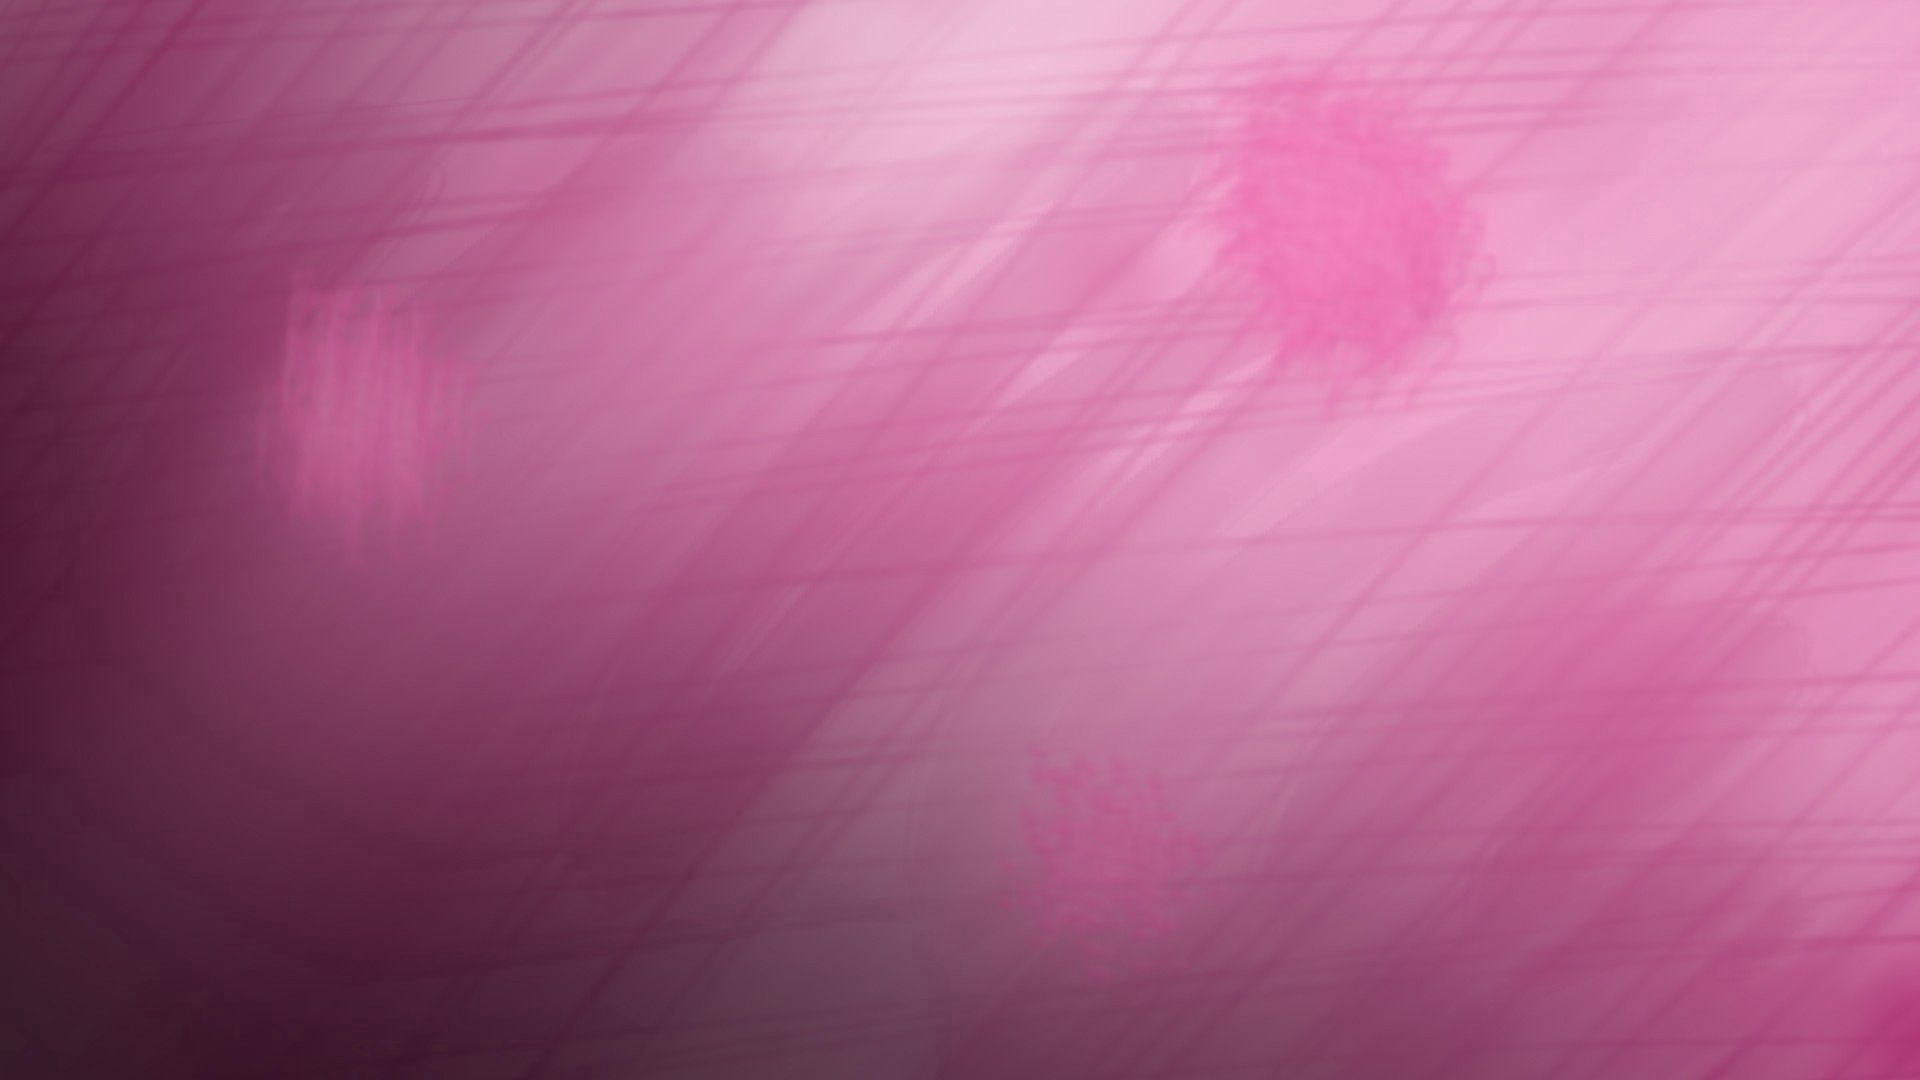 Widescreen image spots, stains, lines, pink